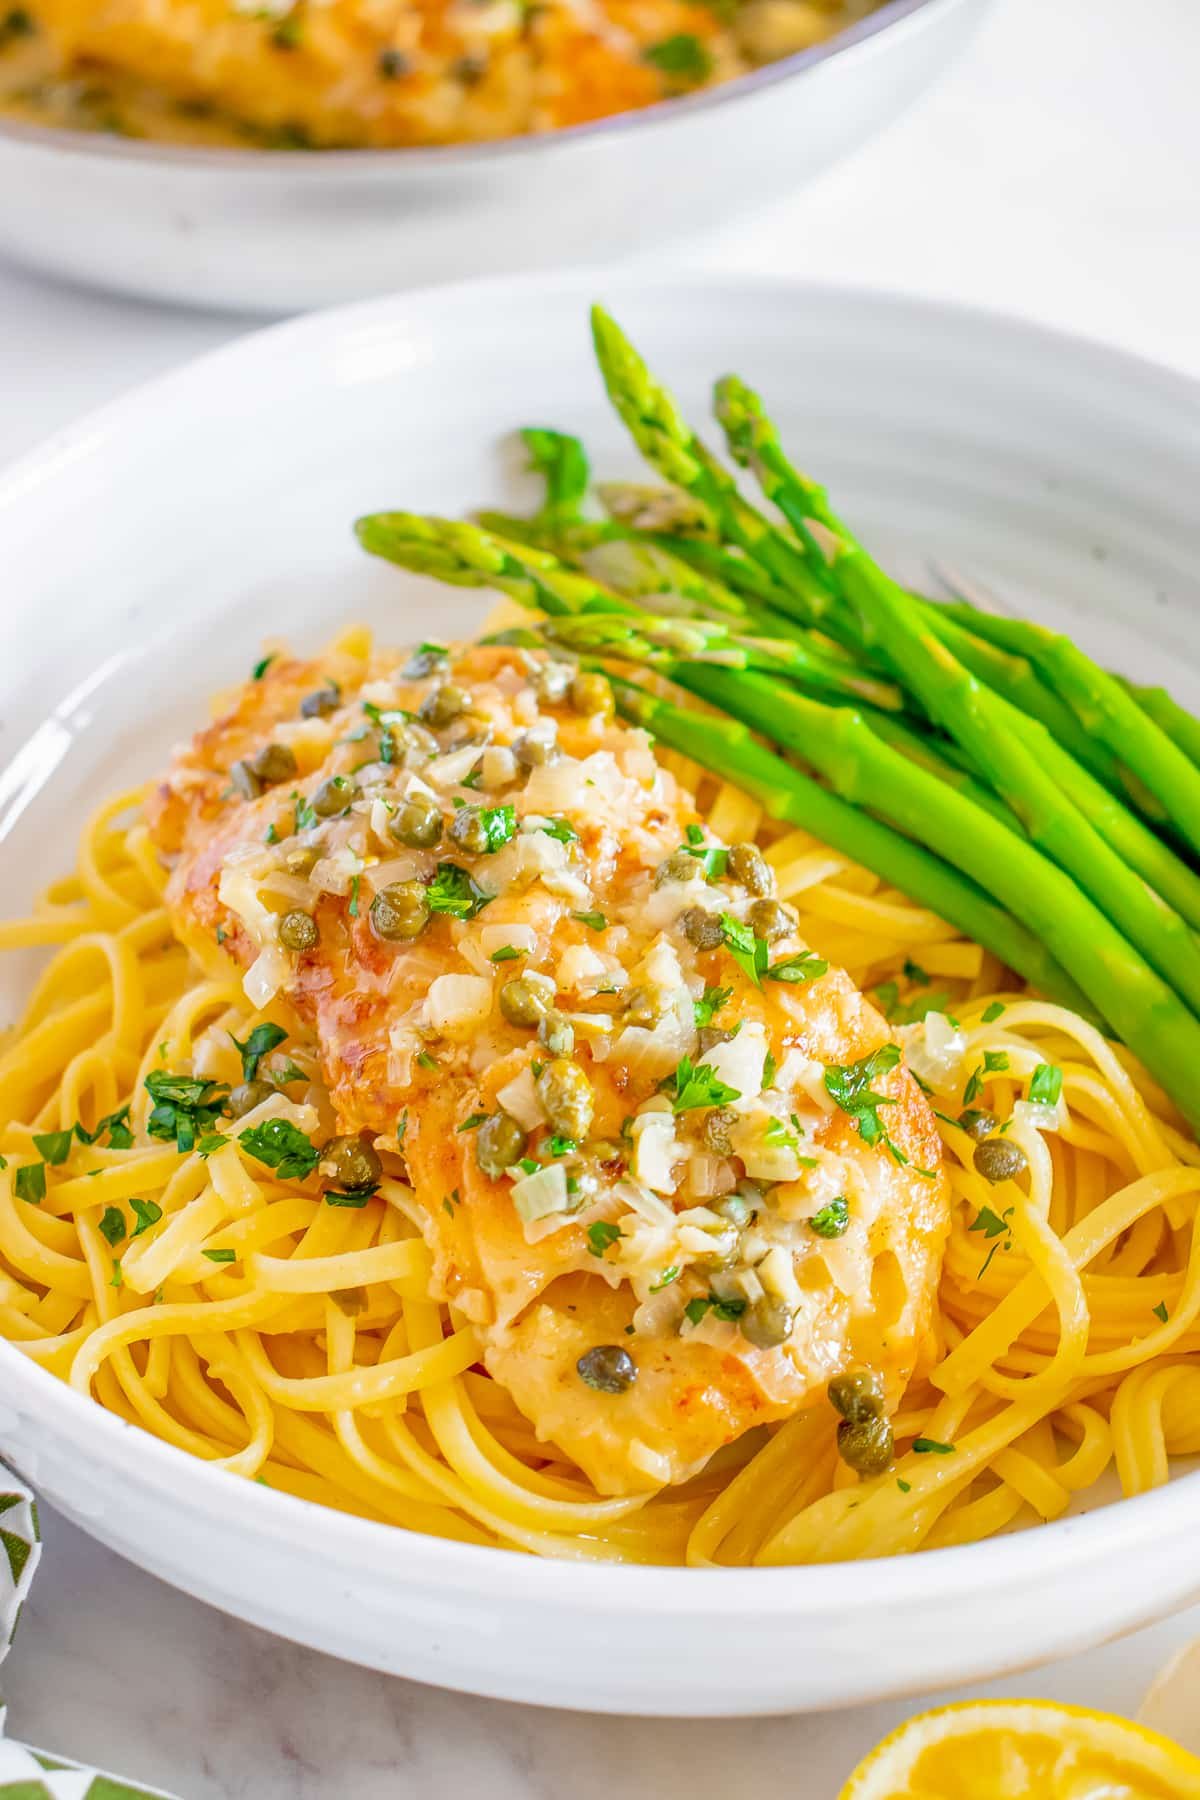 Fish piccata shown served over pasta in a white bowl with asparagus